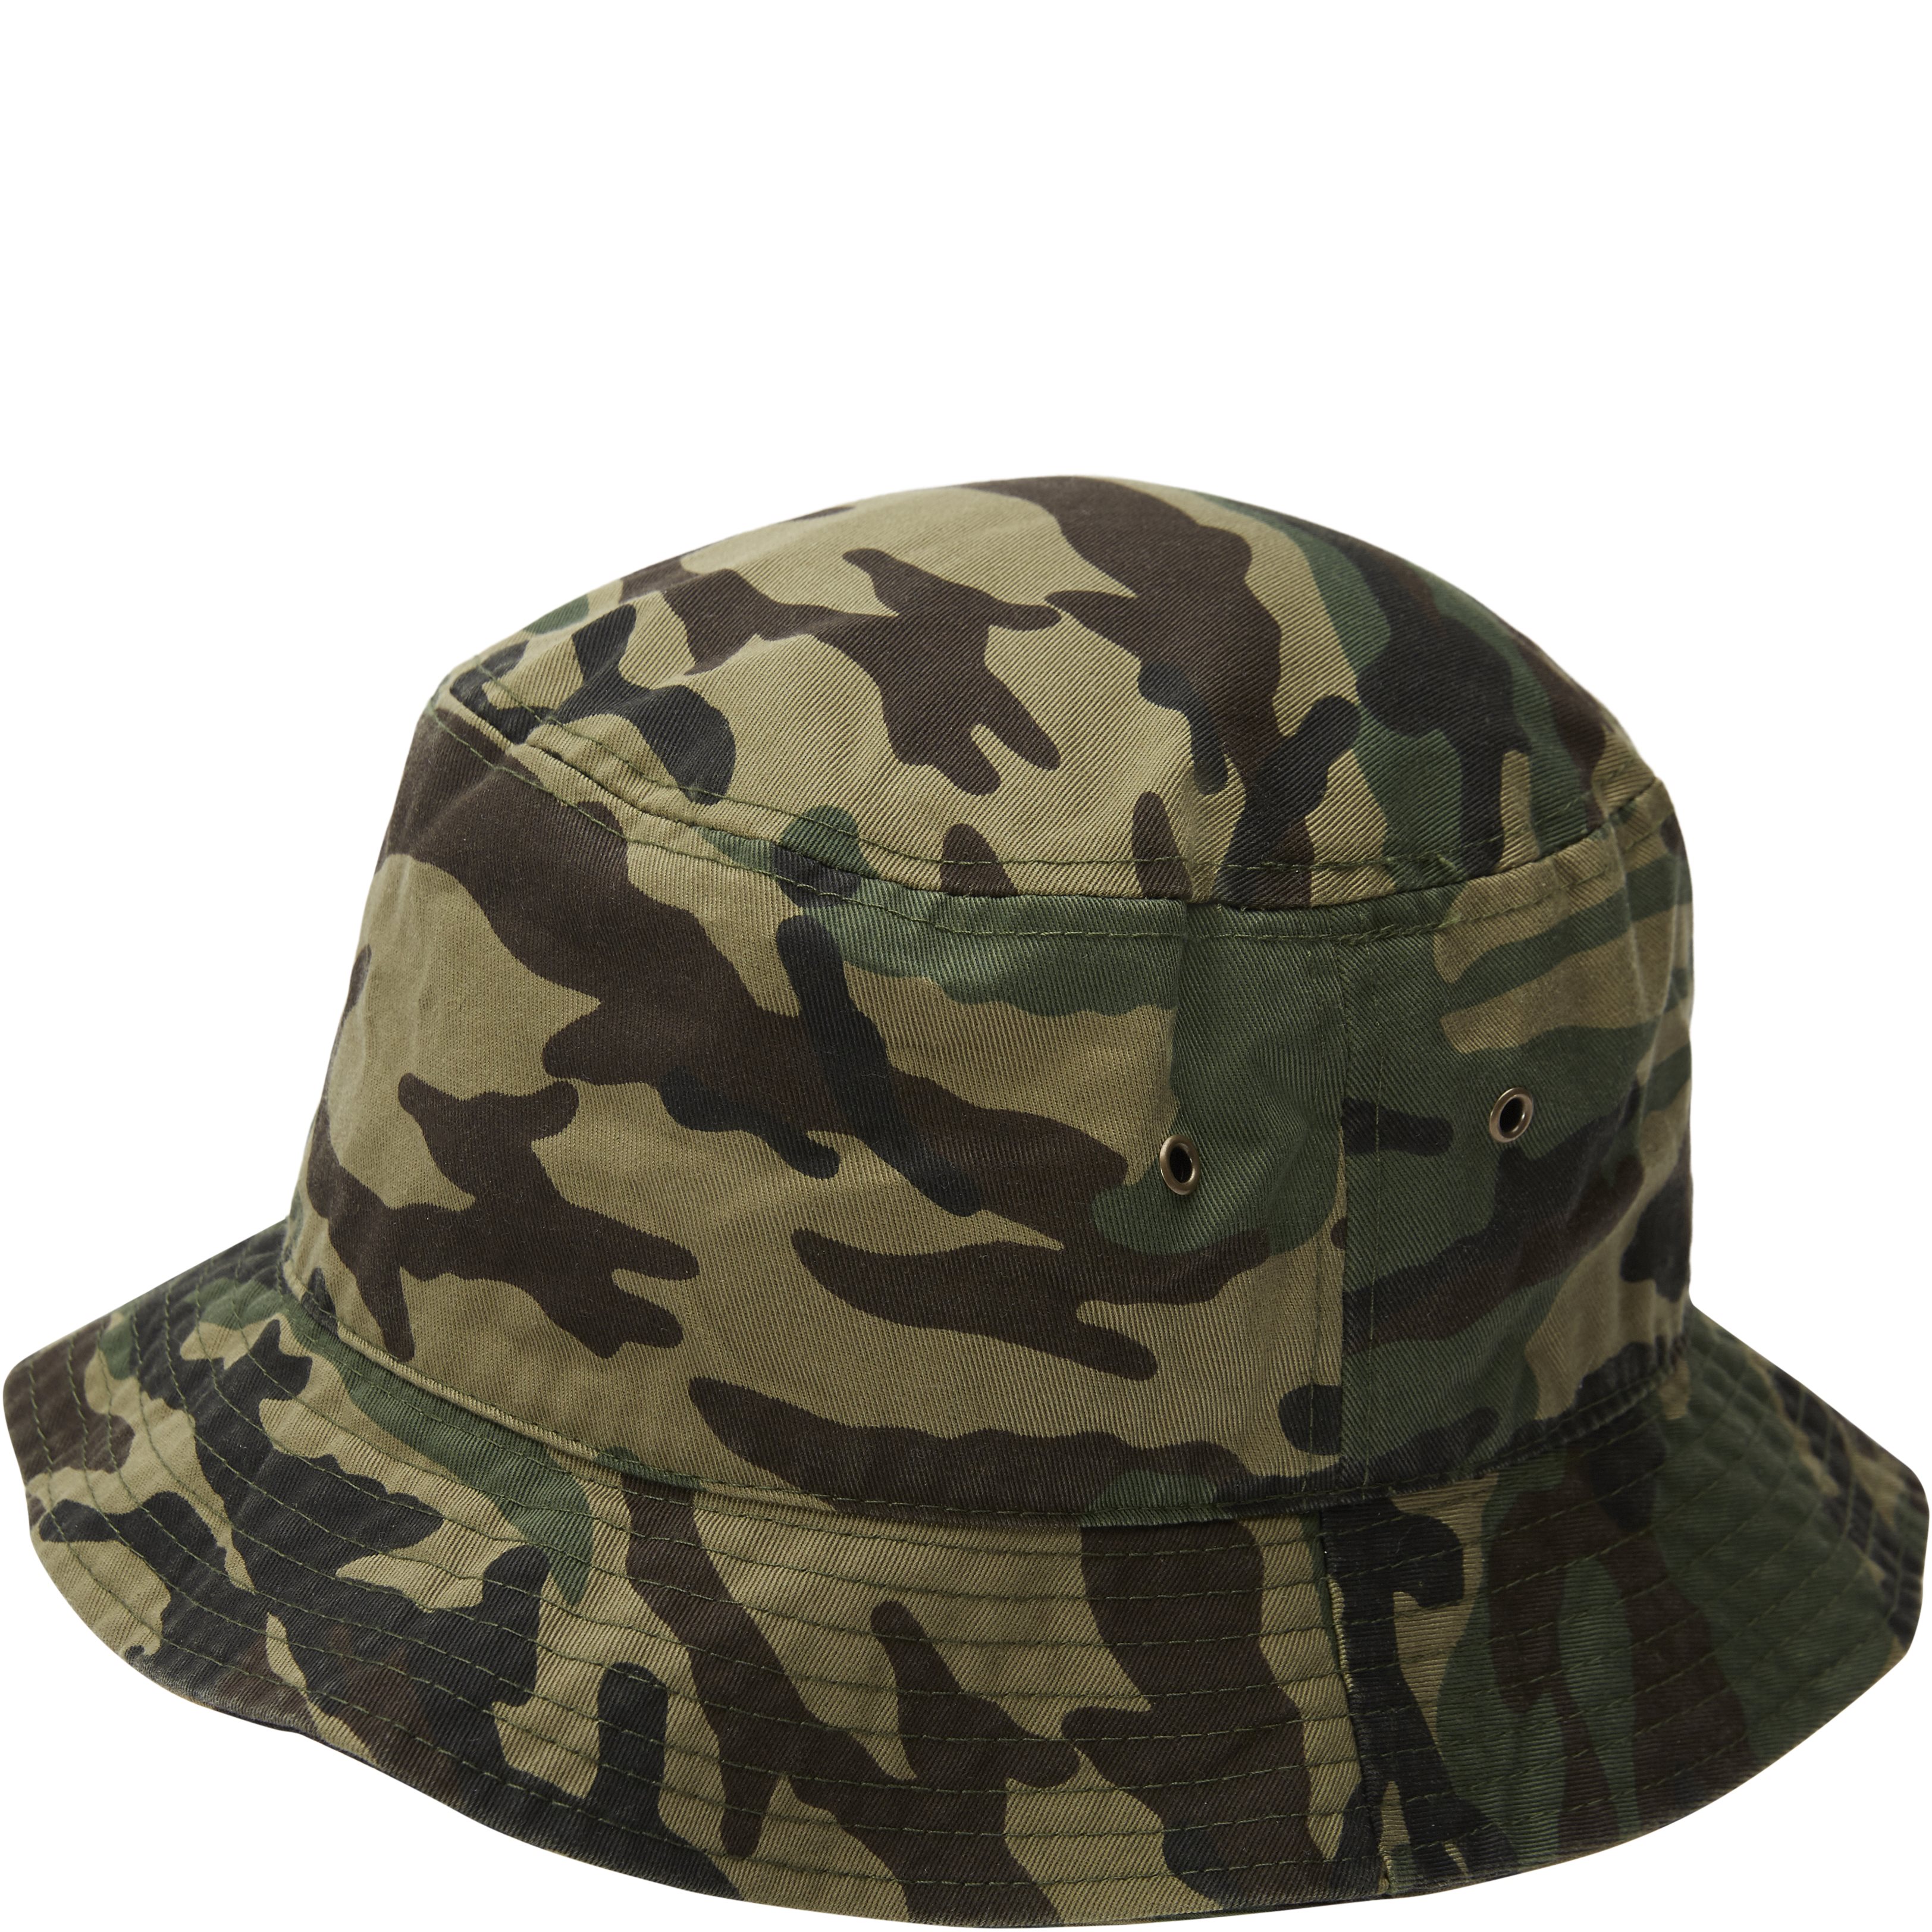 qUINT Hats BUCKET 500 Army